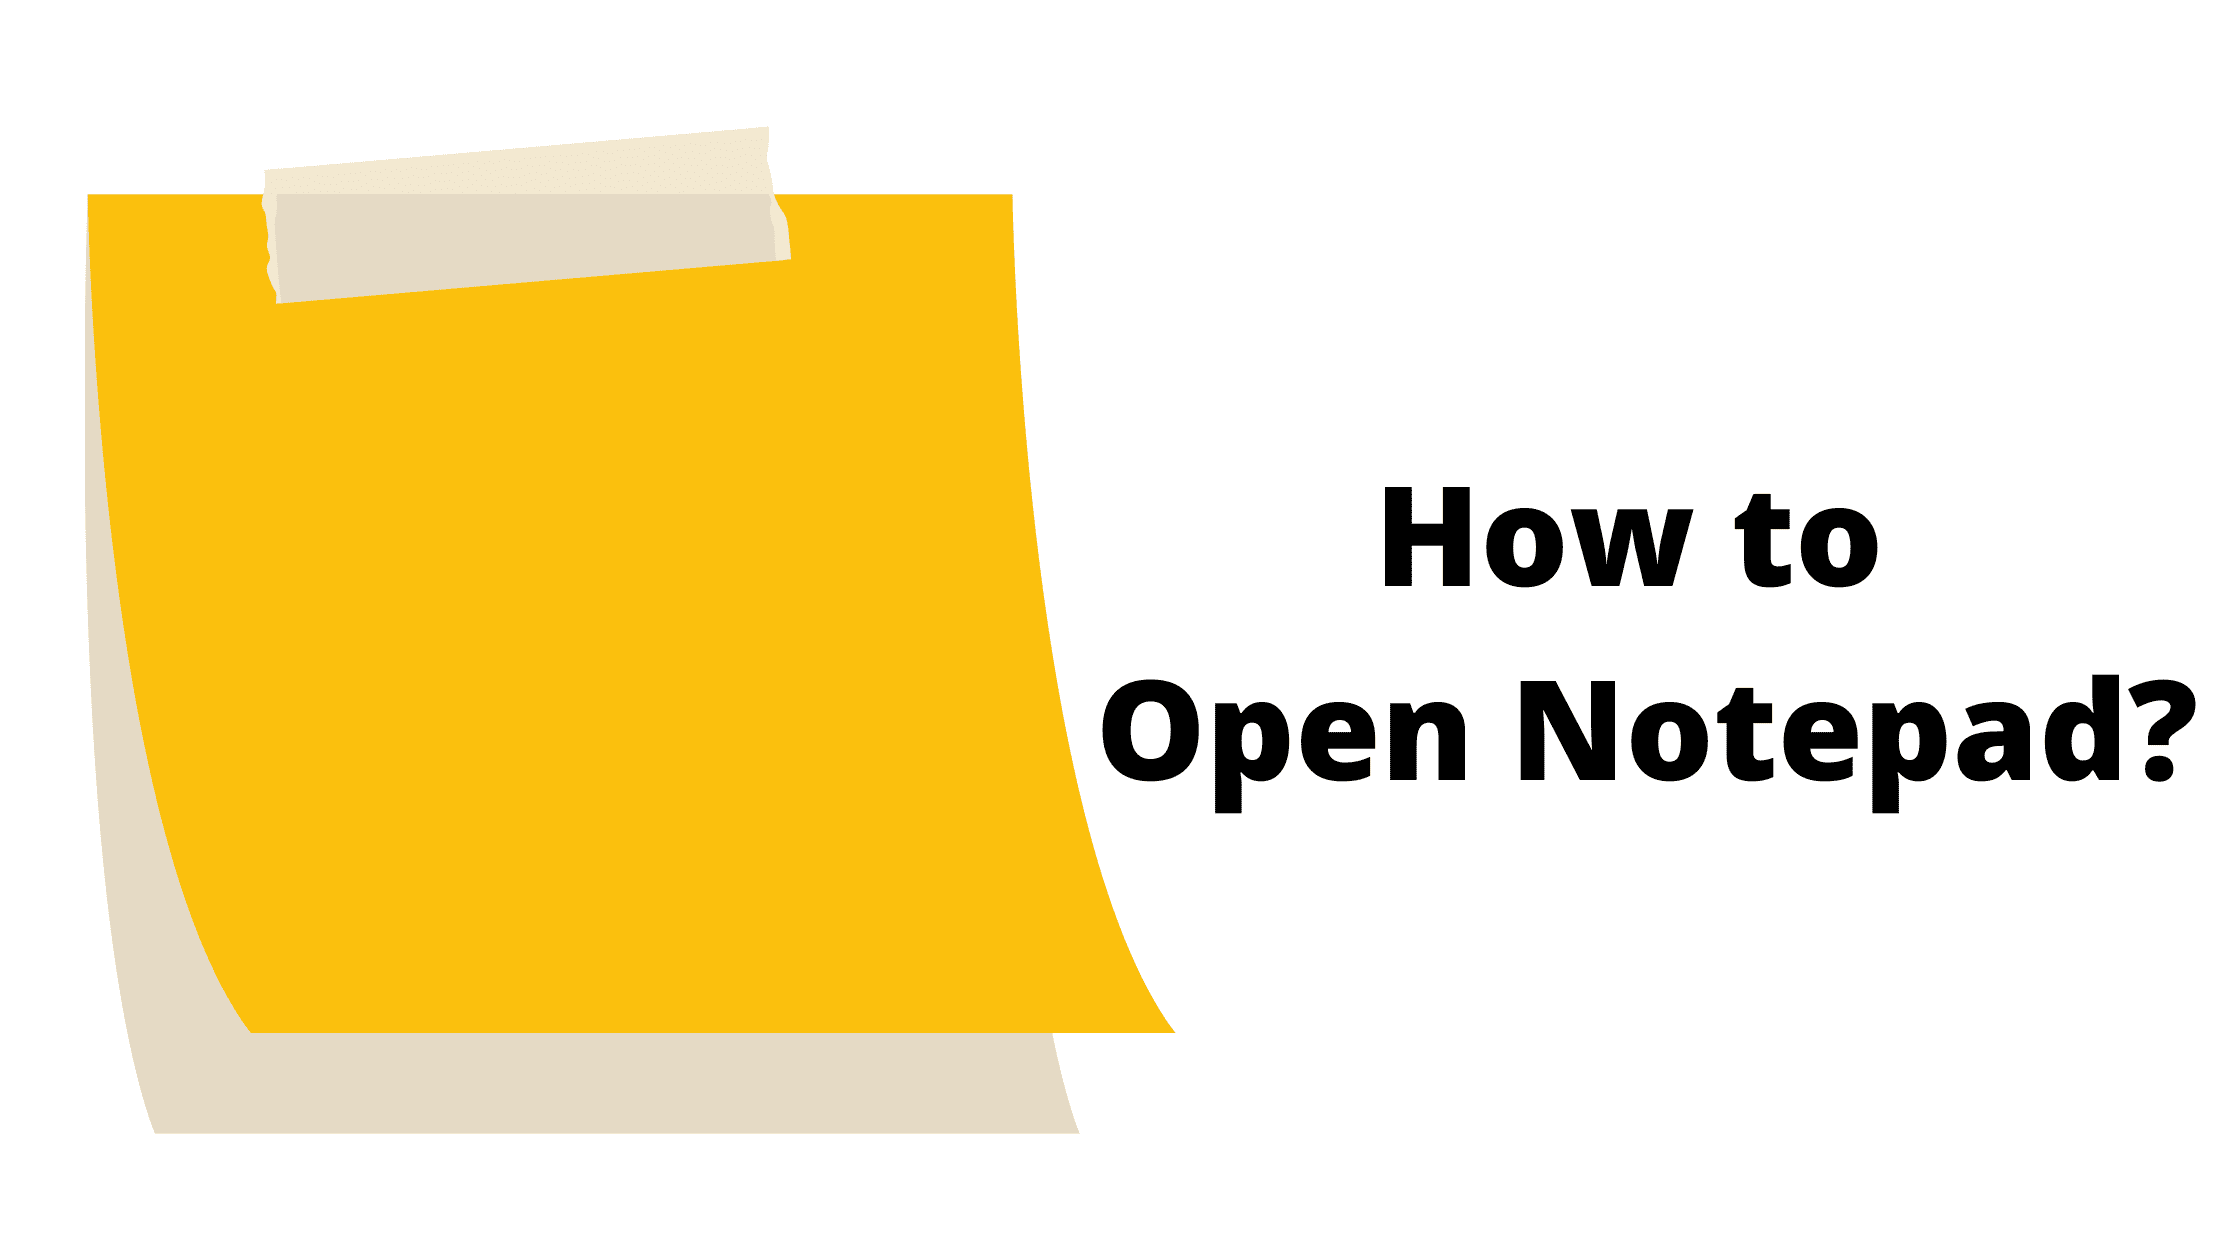 How to Open Notepad?